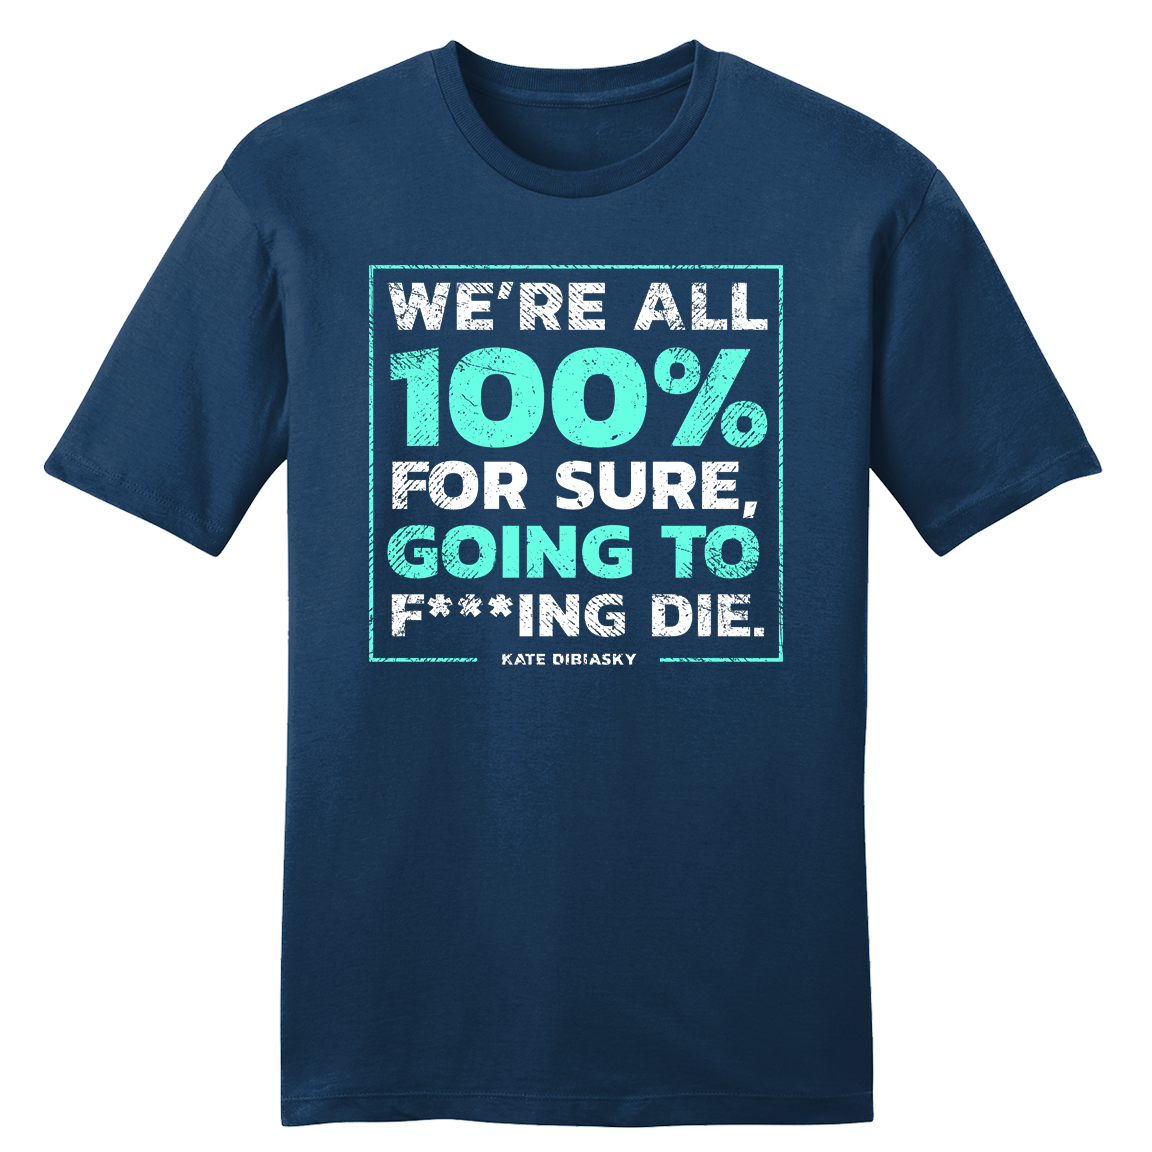 100% Going to Die tee